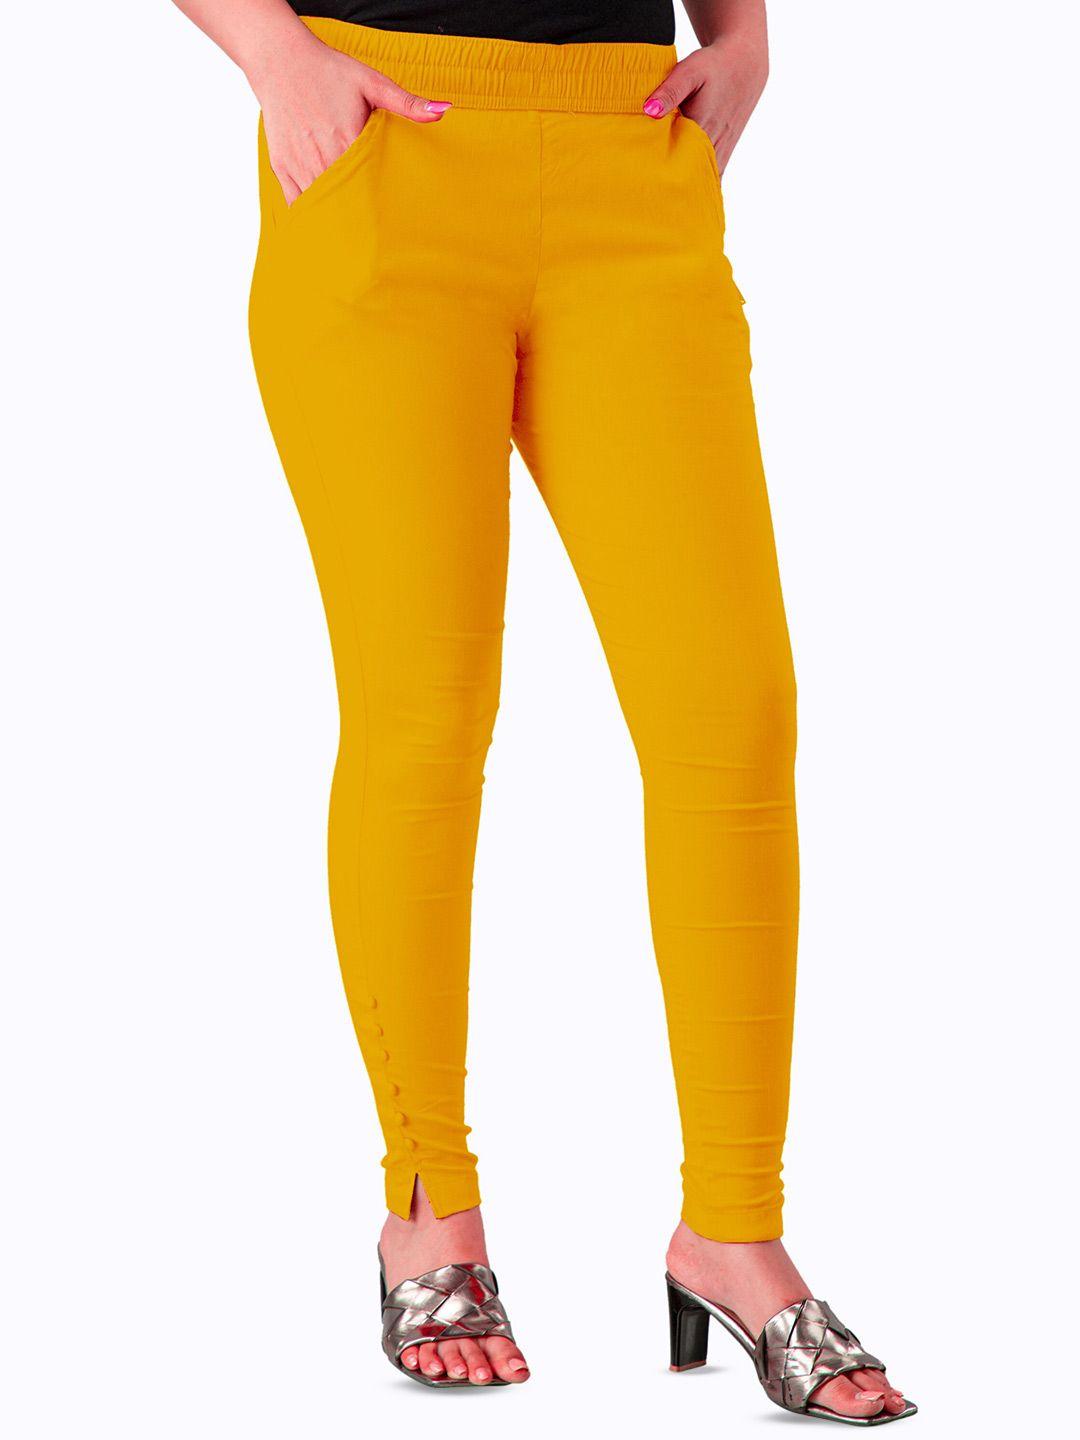 baesd stretchable relaxed fit regular jeggings